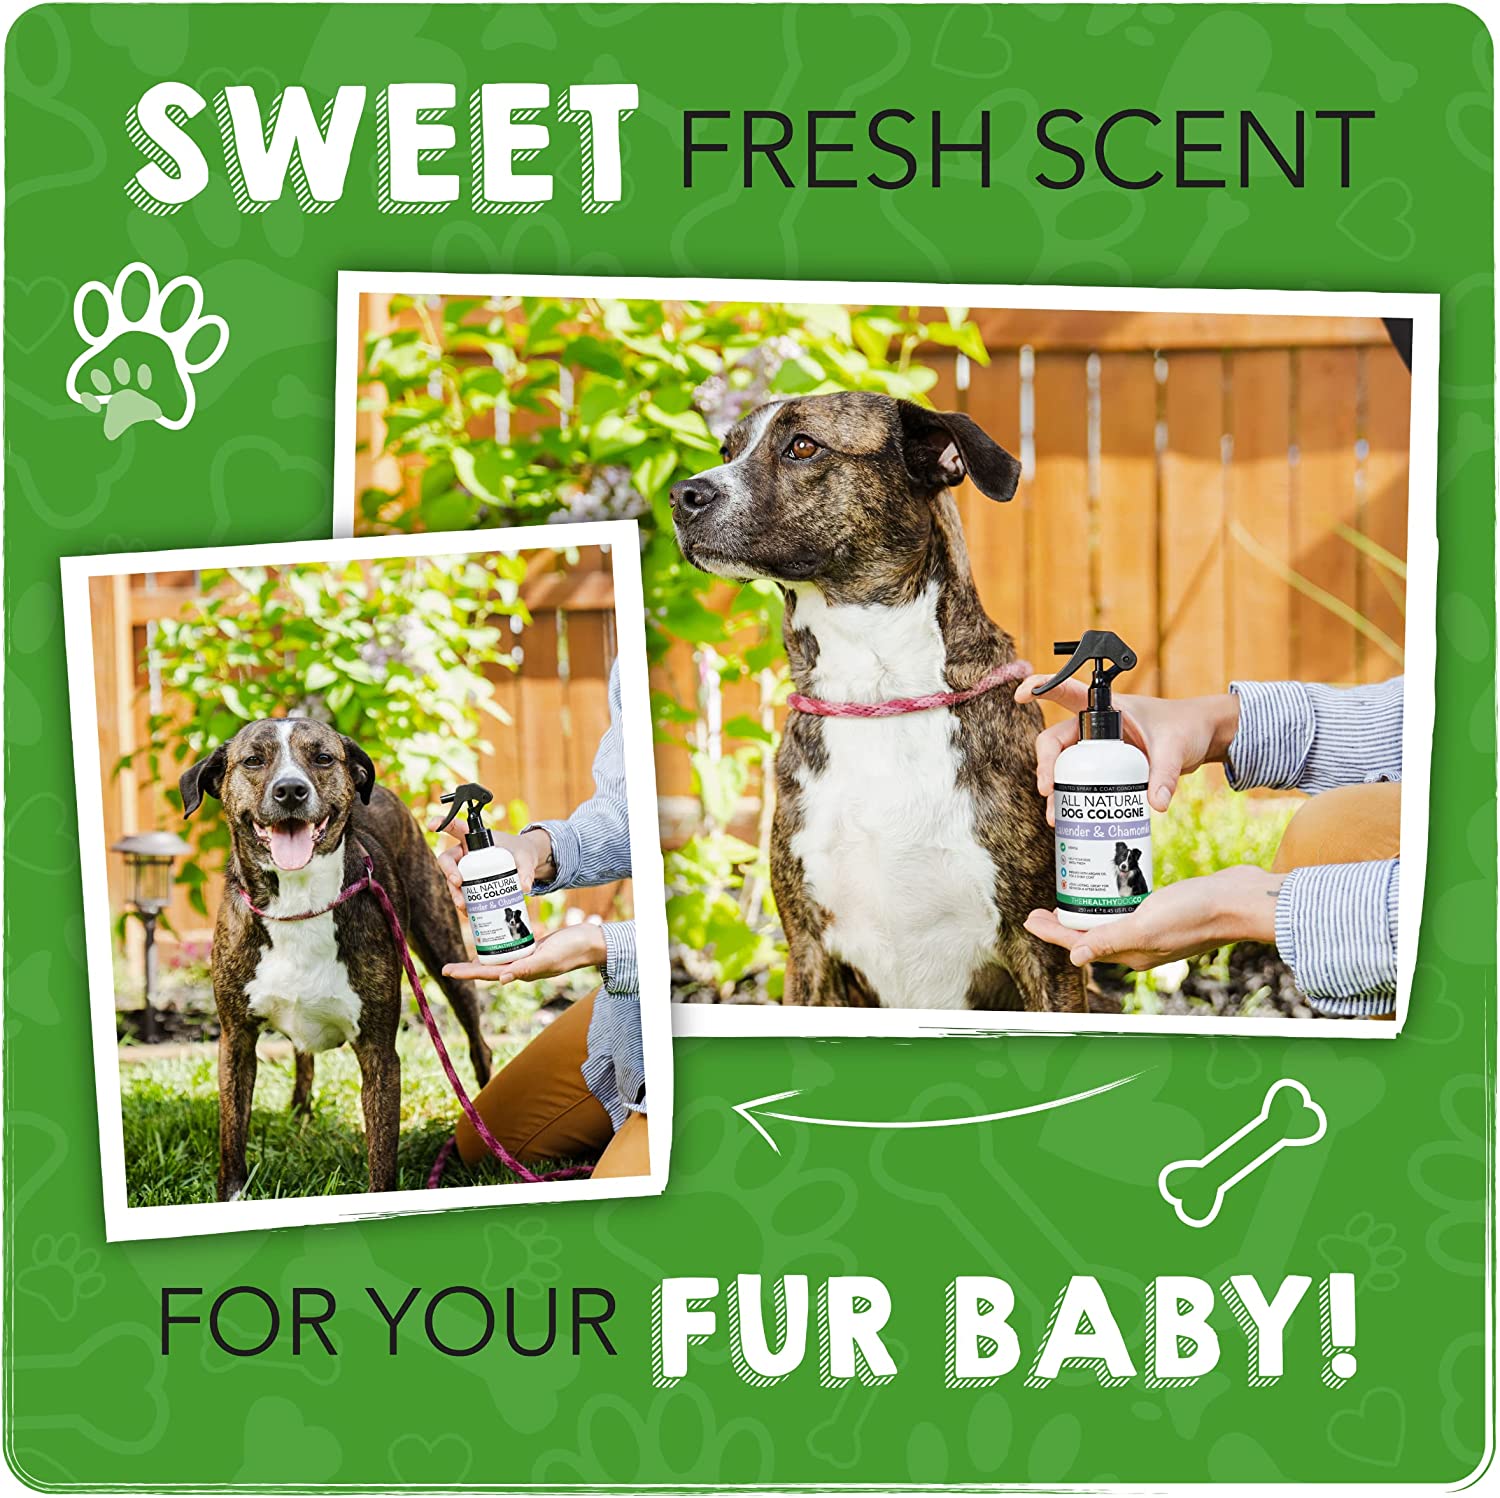 The Healthy Dog Co - Dog Perfume Spray - Lavender and Chamomile